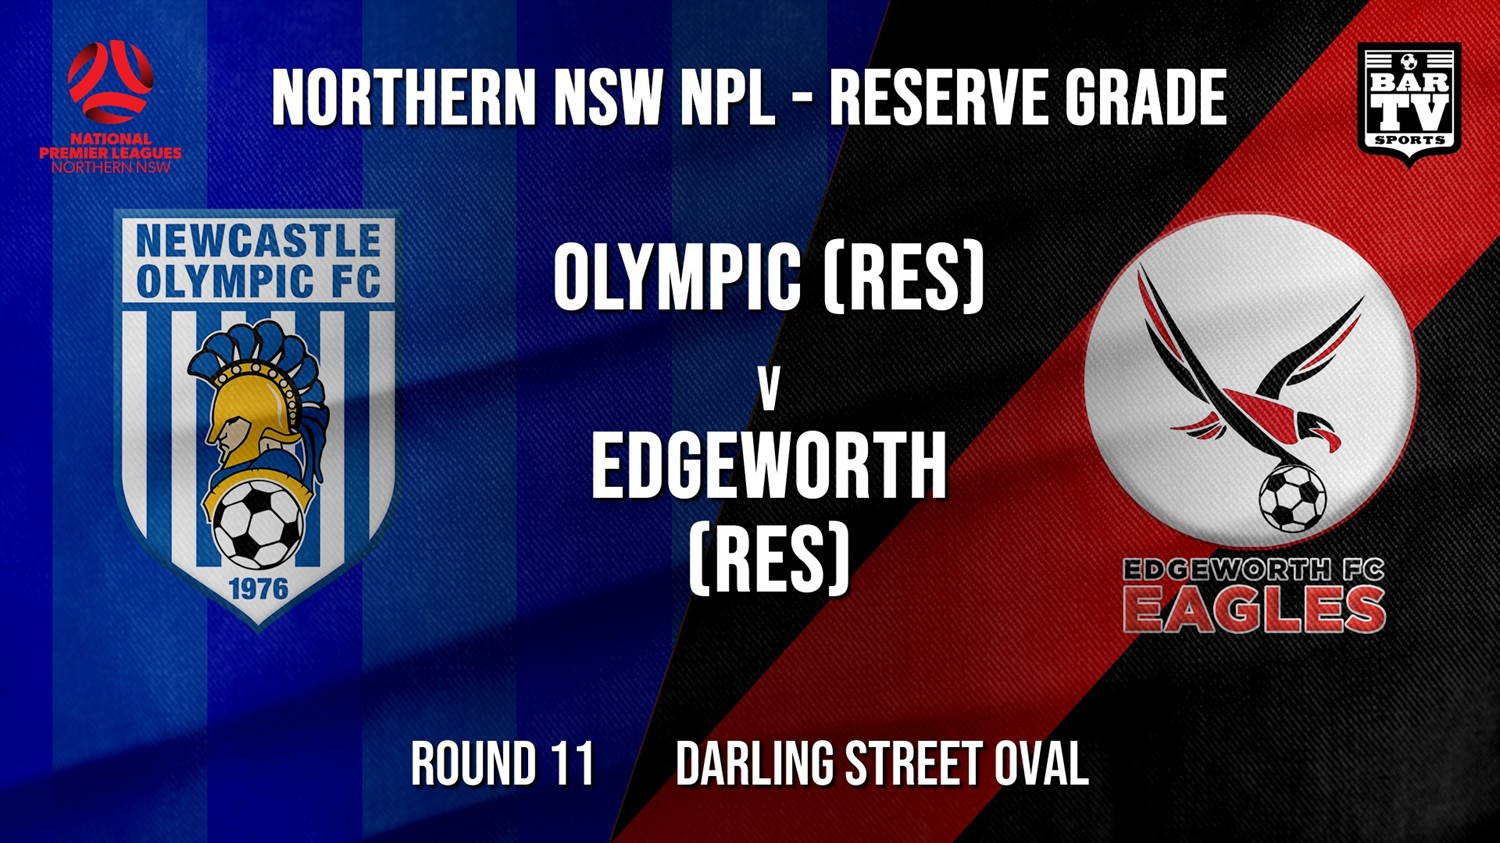 NPL NNSW RES Round 11 - Newcastle Olympic (Res) v Edgeworth Eagles (Res) Minigame Slate Image